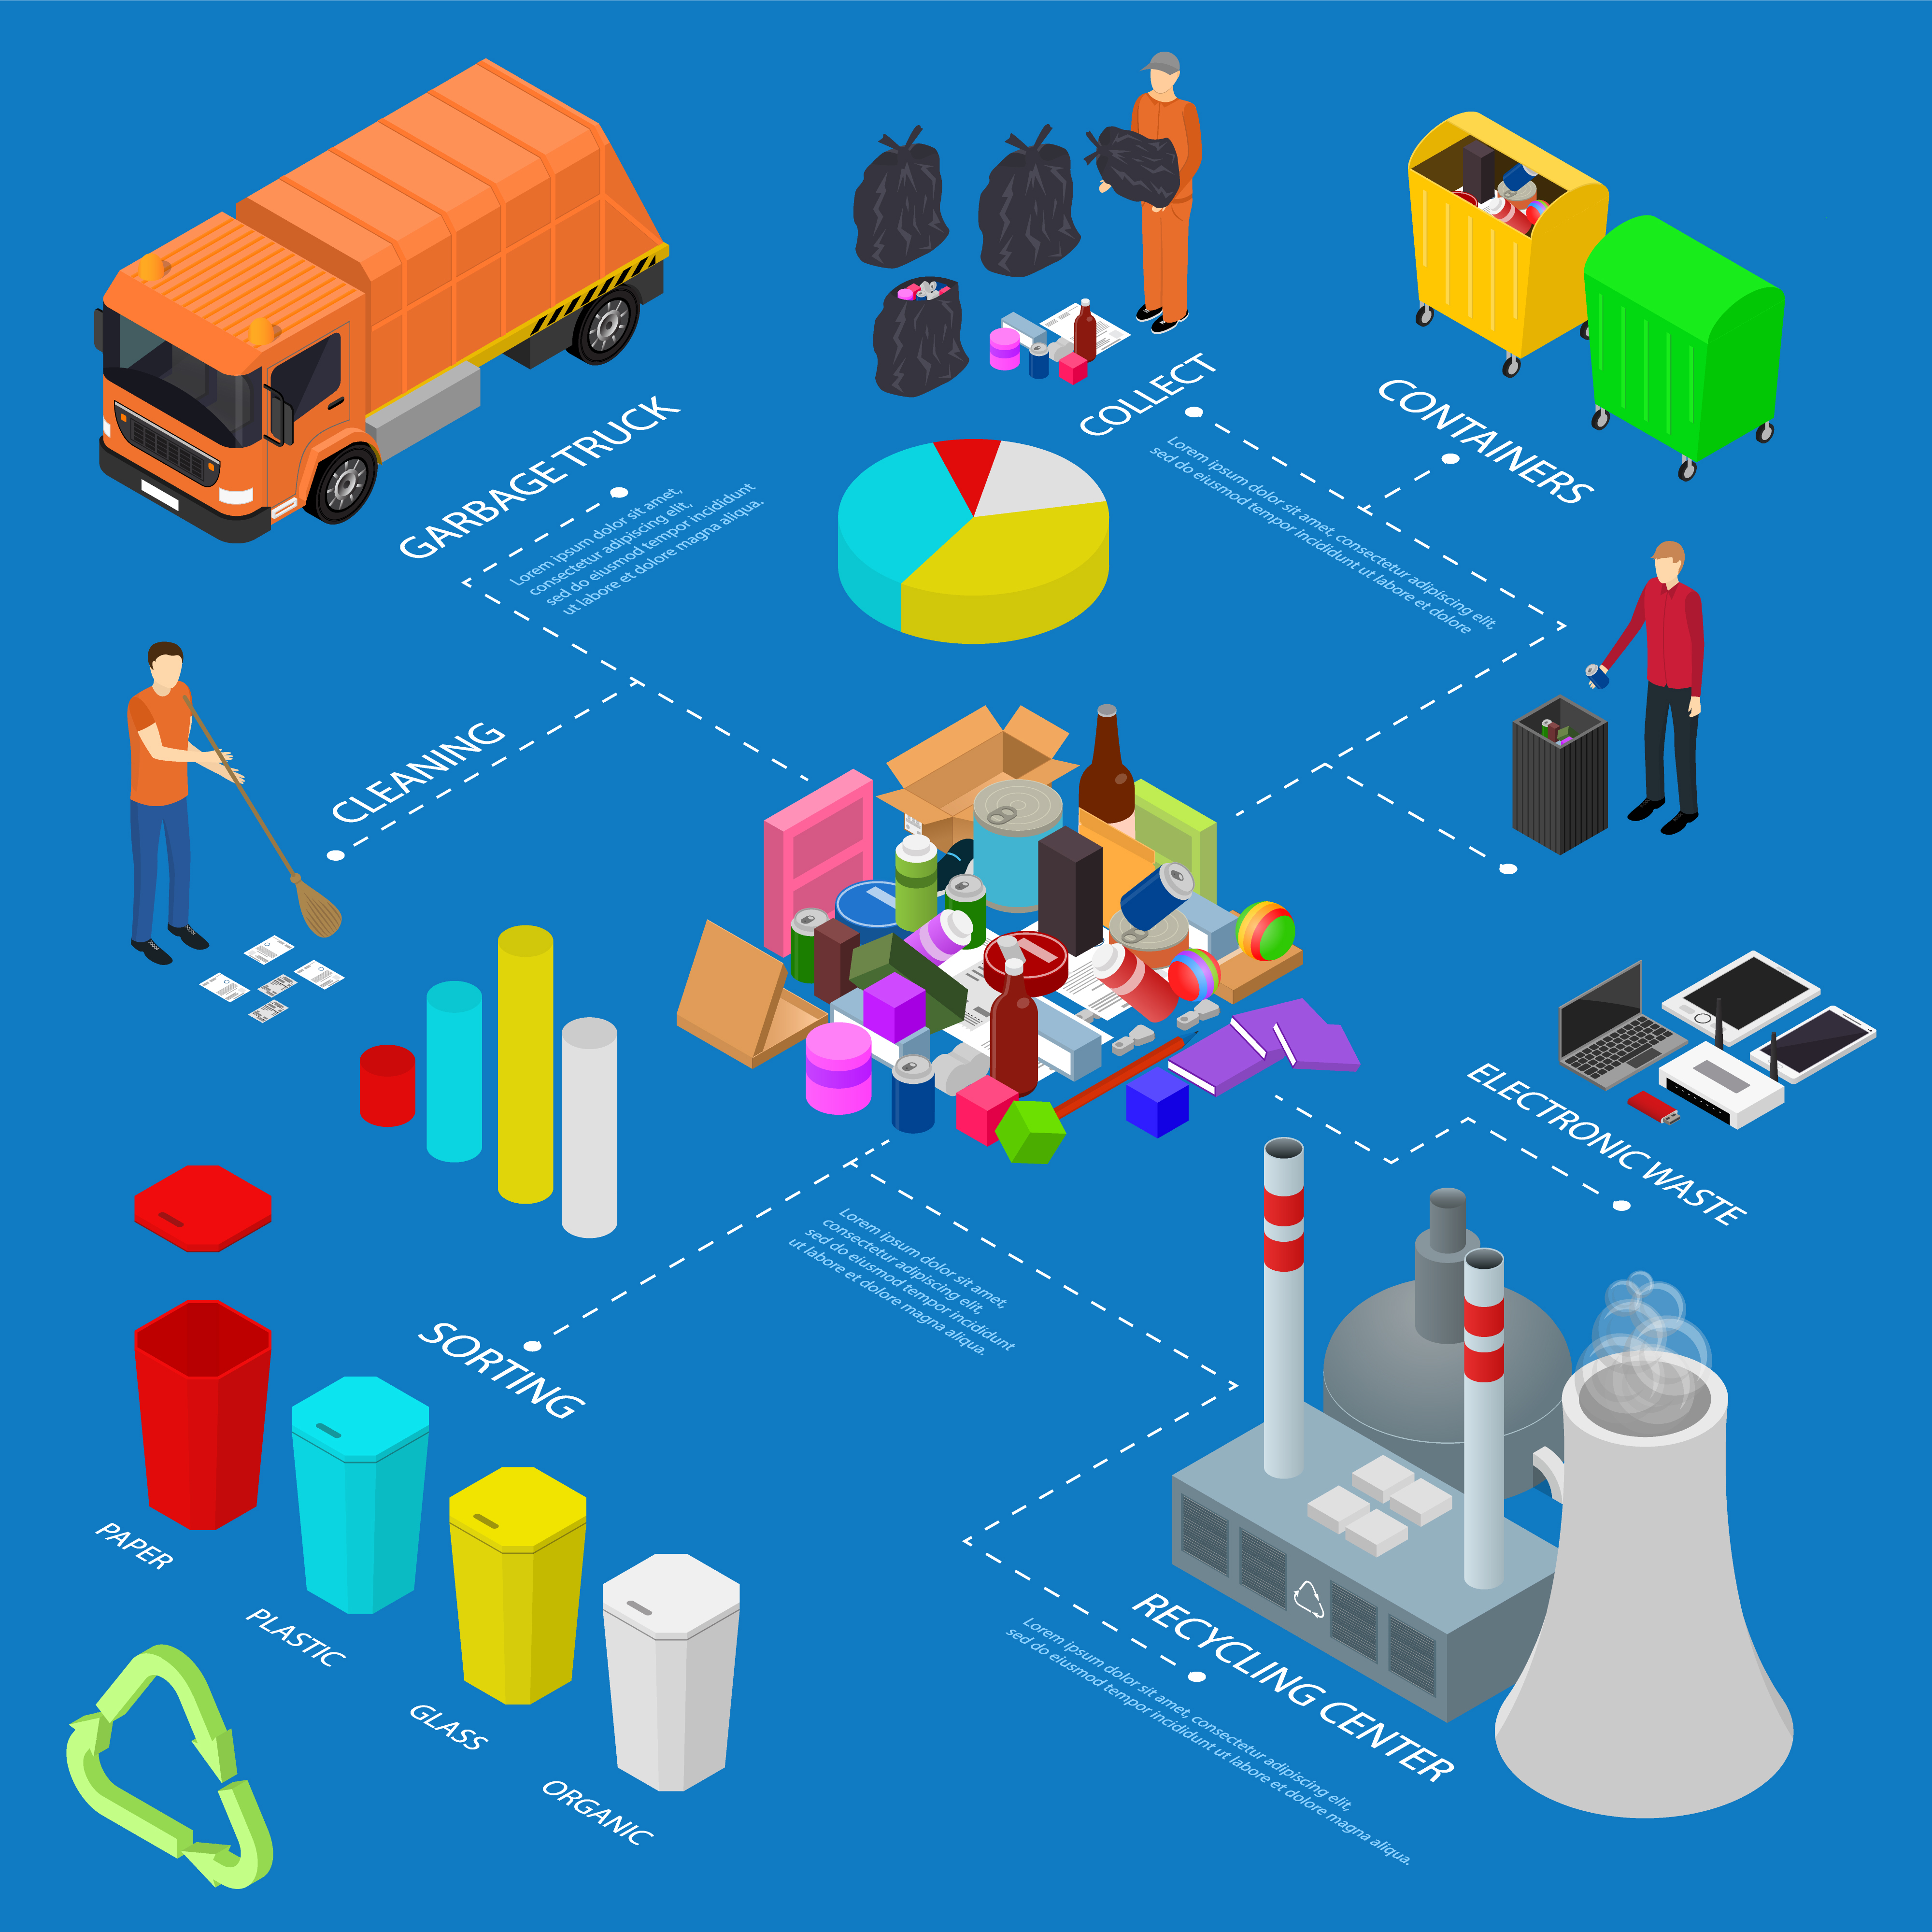 A detailed layout of the recycling process, showing how electronic waste recycling in your business is just as important as paper, plastic, and glass recycling for the environment.